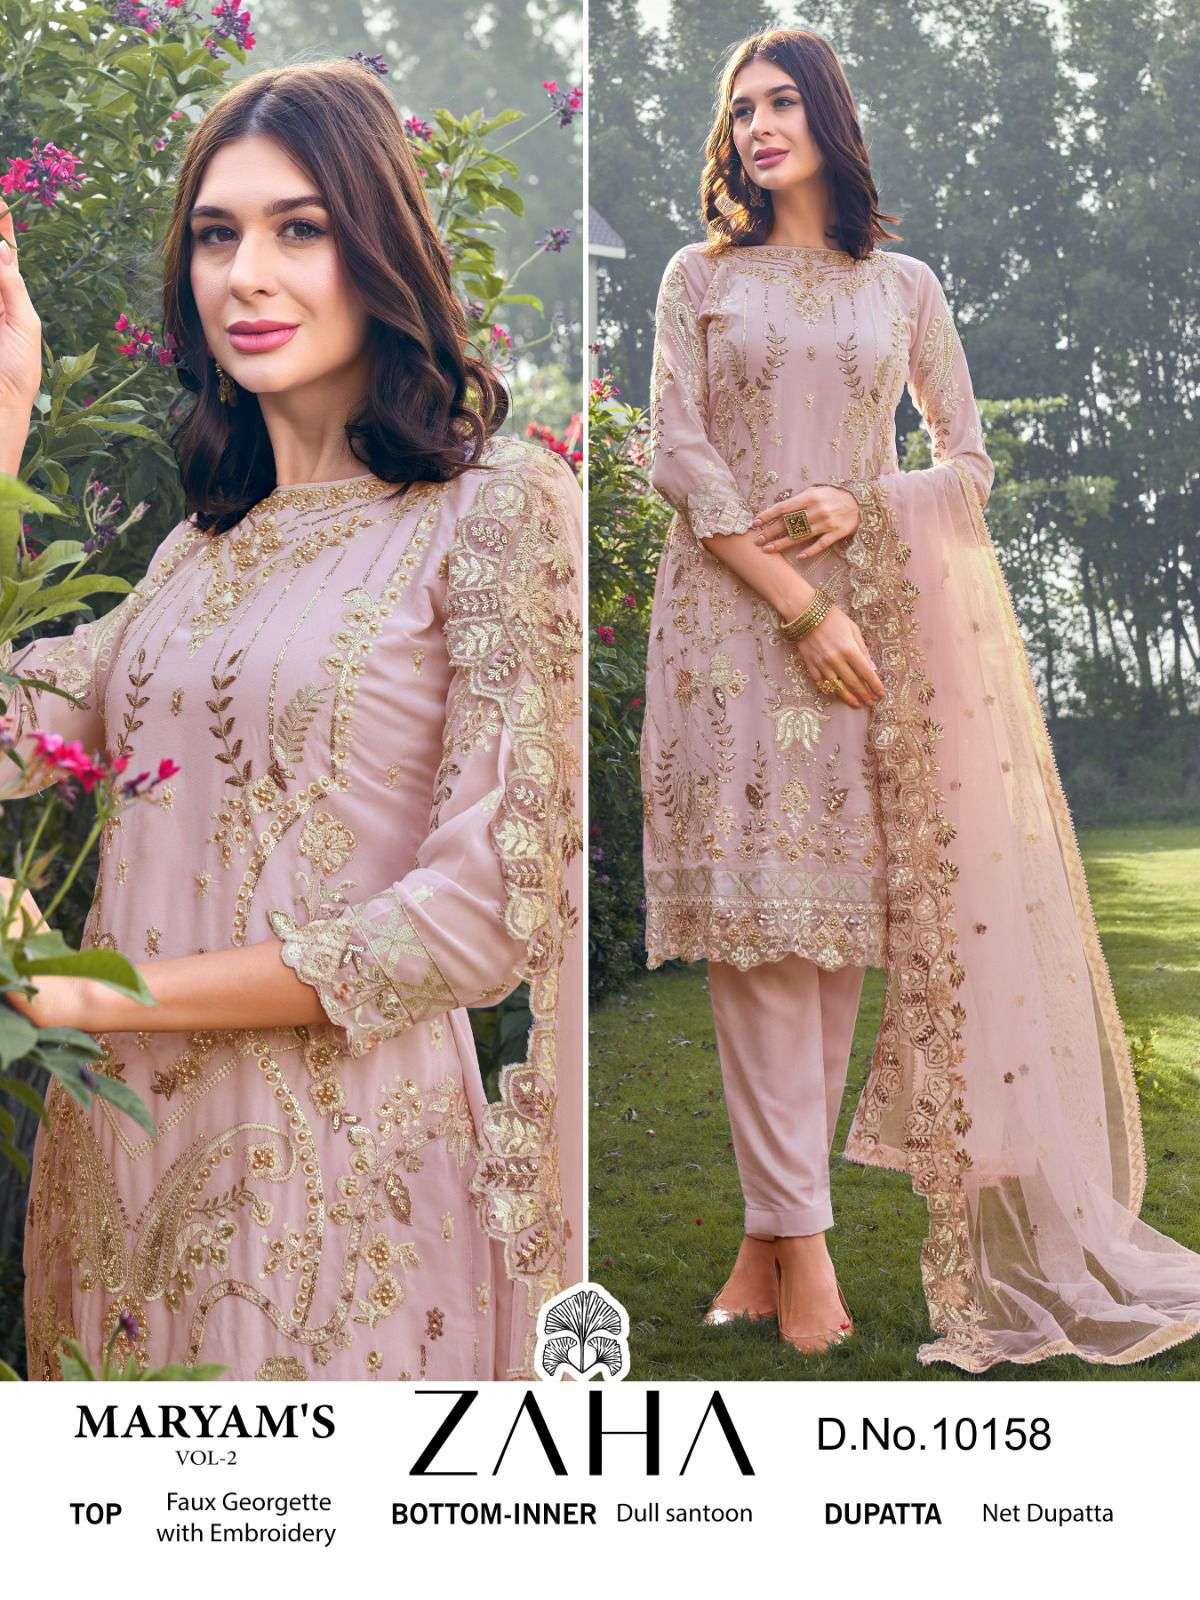 MARYAMS VOL-2 BY ZAHA DESIGNER GEORGETTE WITH HEAVY EMBROIDERED PAKISTANI DRESSES